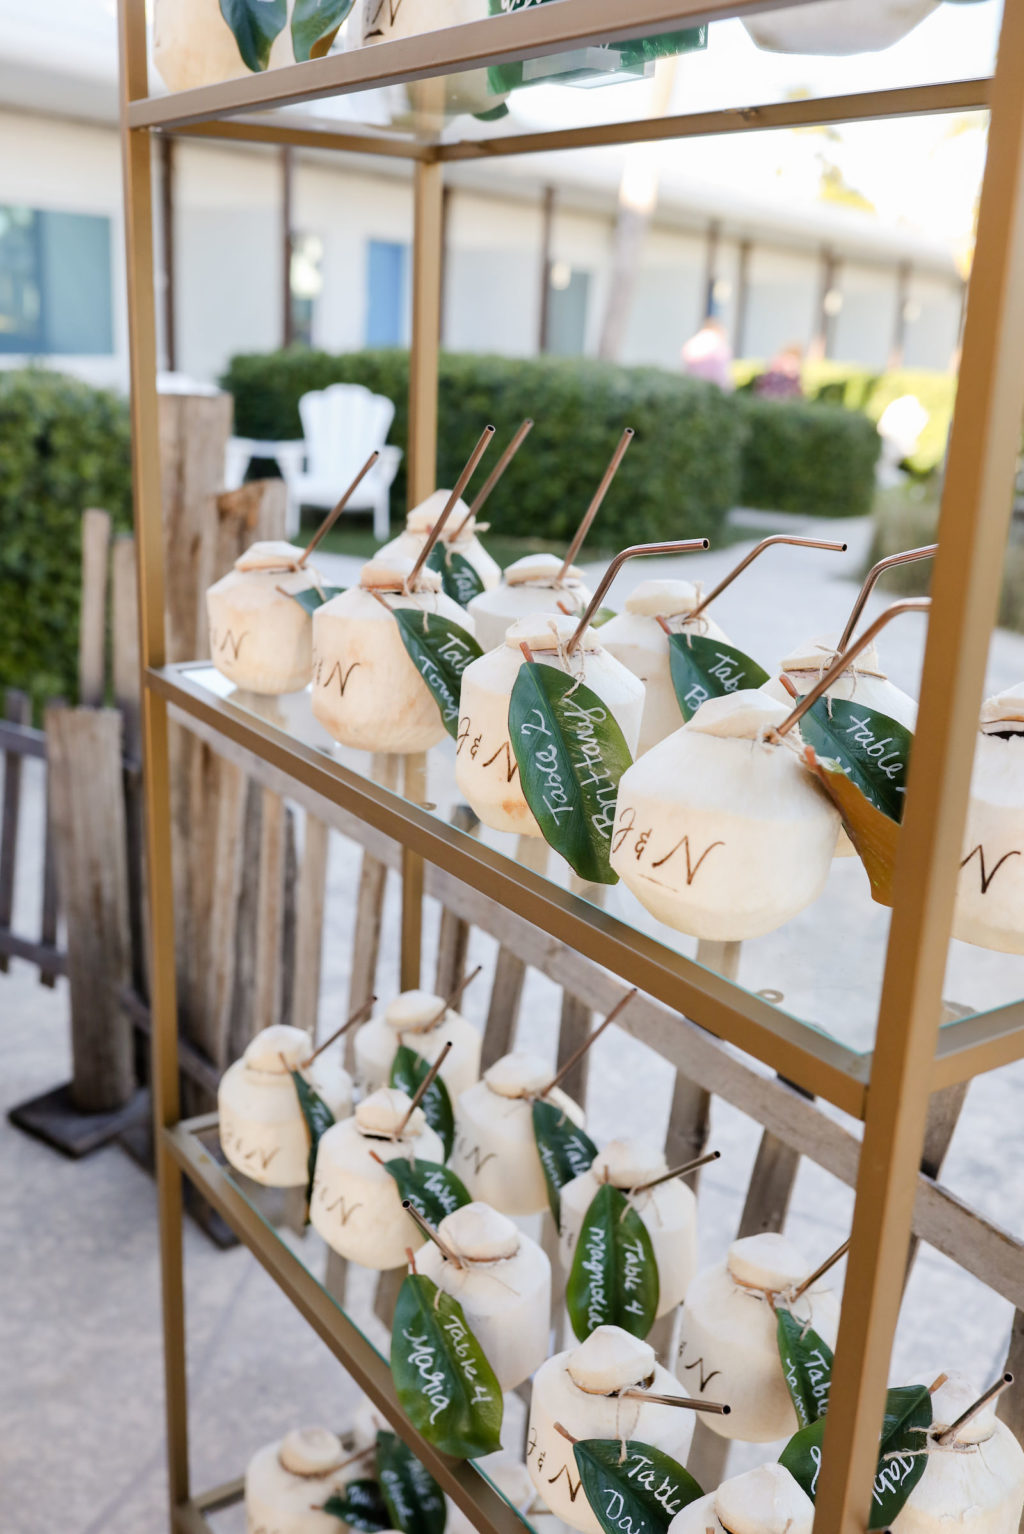 Tropical Florida Wedding Reception Decor, Gold Stand with Personalized Coconuts Place Cards | Tampa Bay Wedding Photographer Lifelong Photography Studio